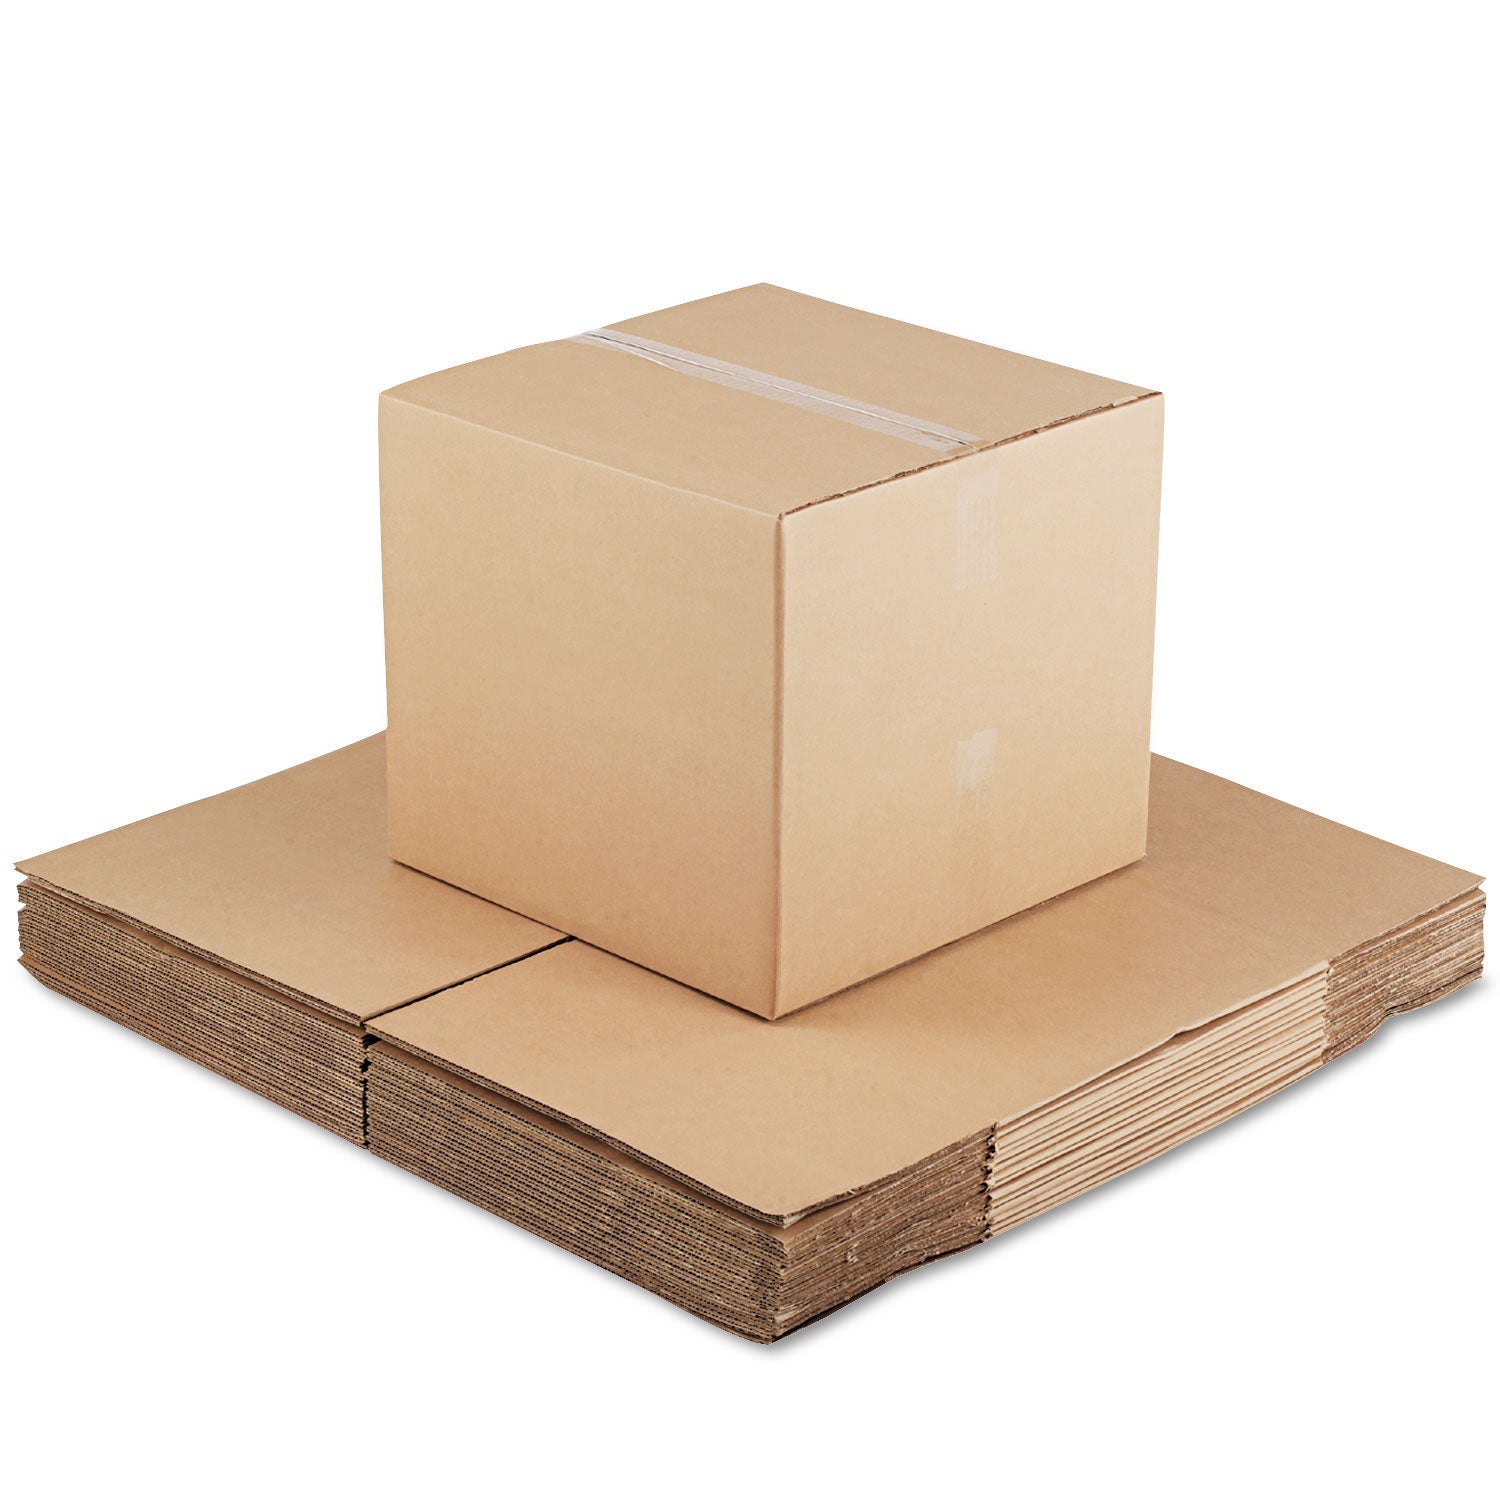 fixed-depth-corrugated-shipping-boxes-regular-slotted-container-rsc-18-x-18-x-16-brown-kraft-15-bundle_unv181816 - 2